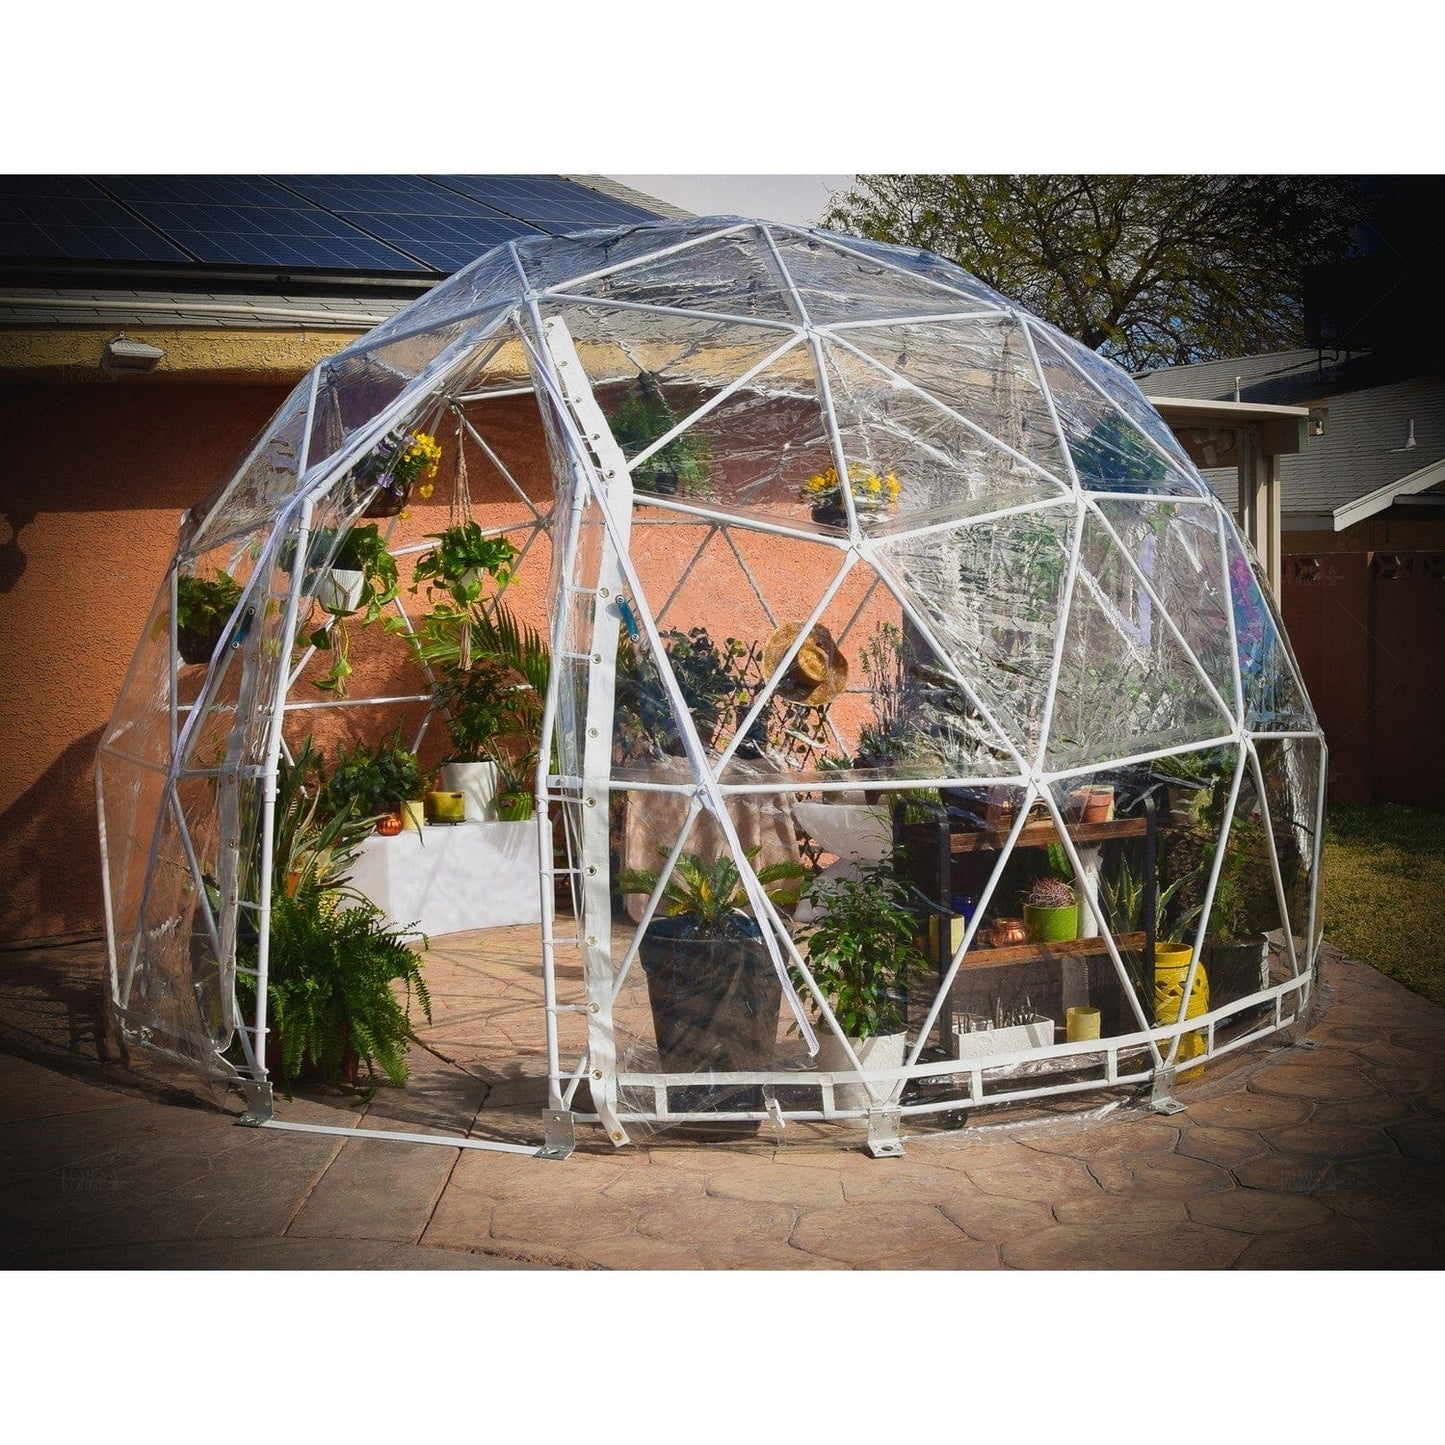 Lumen & Forge Sun Room Kit Lumen & Forge | Geodesic Dome Greenhouse, Sunroom, Dining - 20 ft 6m-Dome